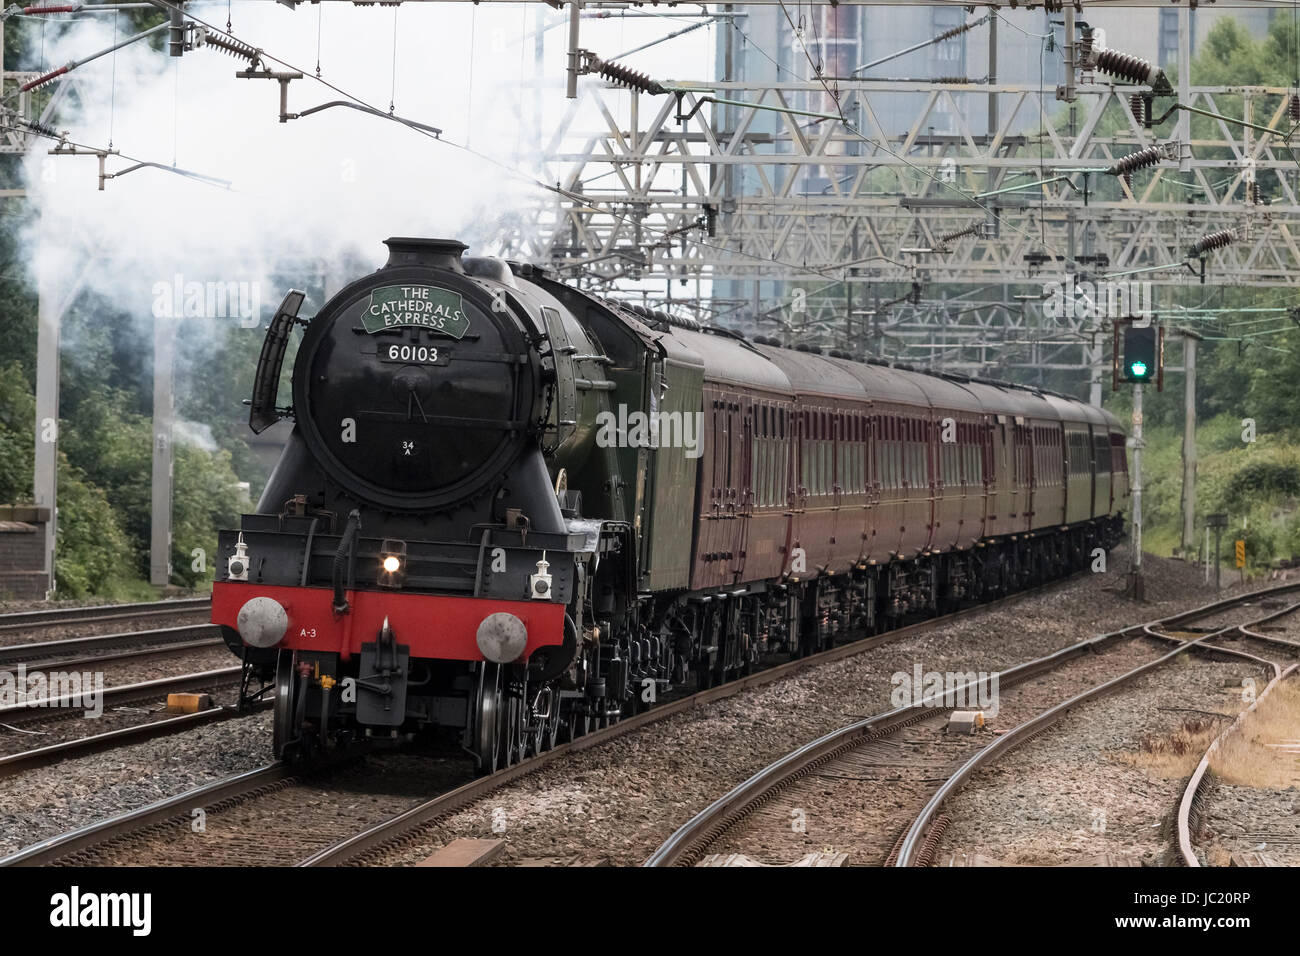 Rugeley, Staffordshire, UK. 13th Jun, 2017. Preserved British Rail A3 Pacific steam locomotive 'Flying Scotsman' passes through Rugeley Trent Valley station working the Cathedrals Express railway charter from London Victoria to Chester, on the 13th June 2017. The locomotive is generally seen as the most famous steam engine in the world, having been the first steam locomotive to officially reach 100mph. Credit: Richard Holmes/Alamy Live News Stock Photo